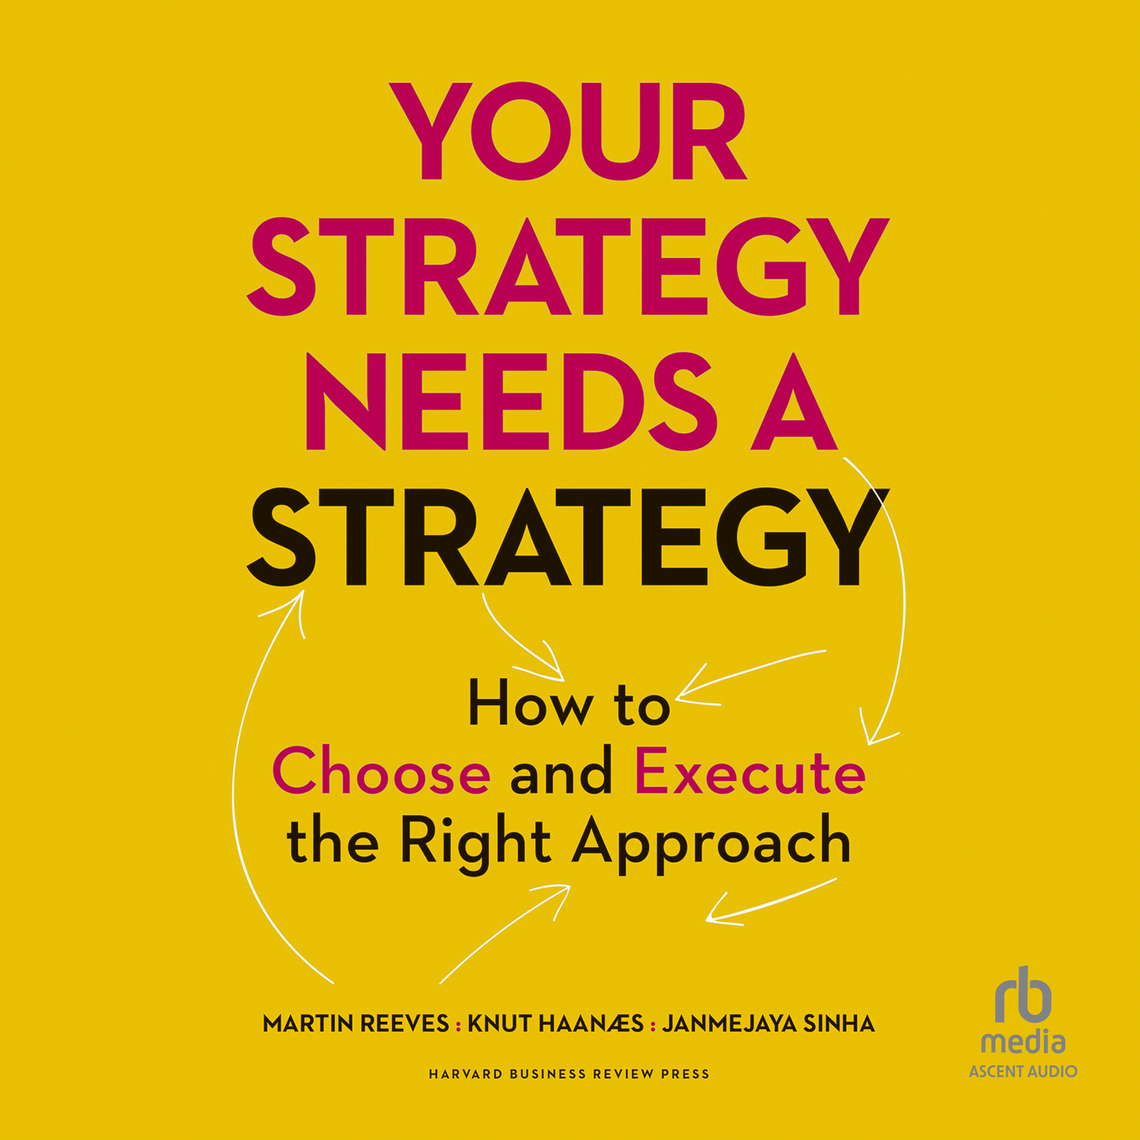 Needs　Your　Strategy　Audiobook　Reeves,　Haanaes,　Sinha　by　Martin　Everand　Knut　Janmejaya　Strategy　a